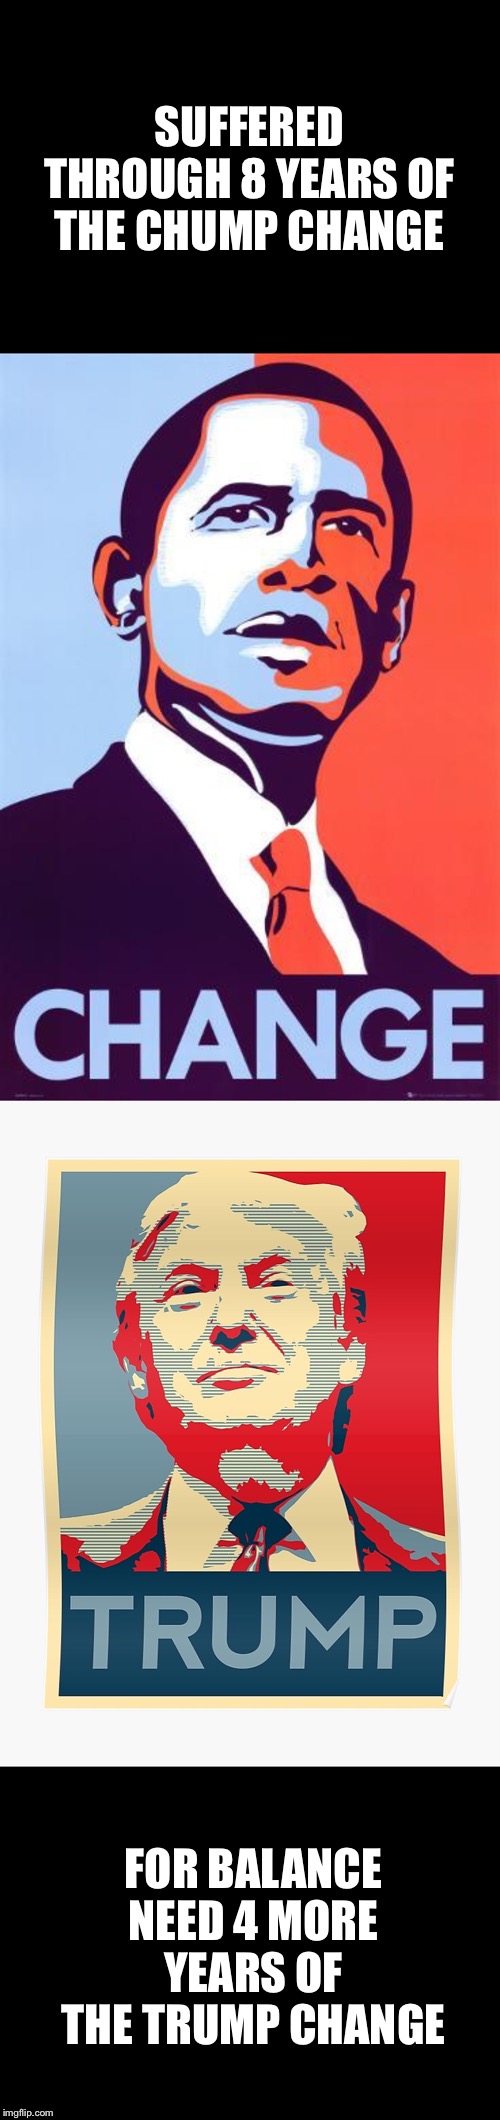 Play the Trump Card | SUFFERED THROUGH 8 YEARS OF THE CHUMP CHANGE; FOR BALANCE NEED 4 MORE YEARS OF THE TRUMP CHANGE | image tagged in obama,trump,2020,change | made w/ Imgflip meme maker